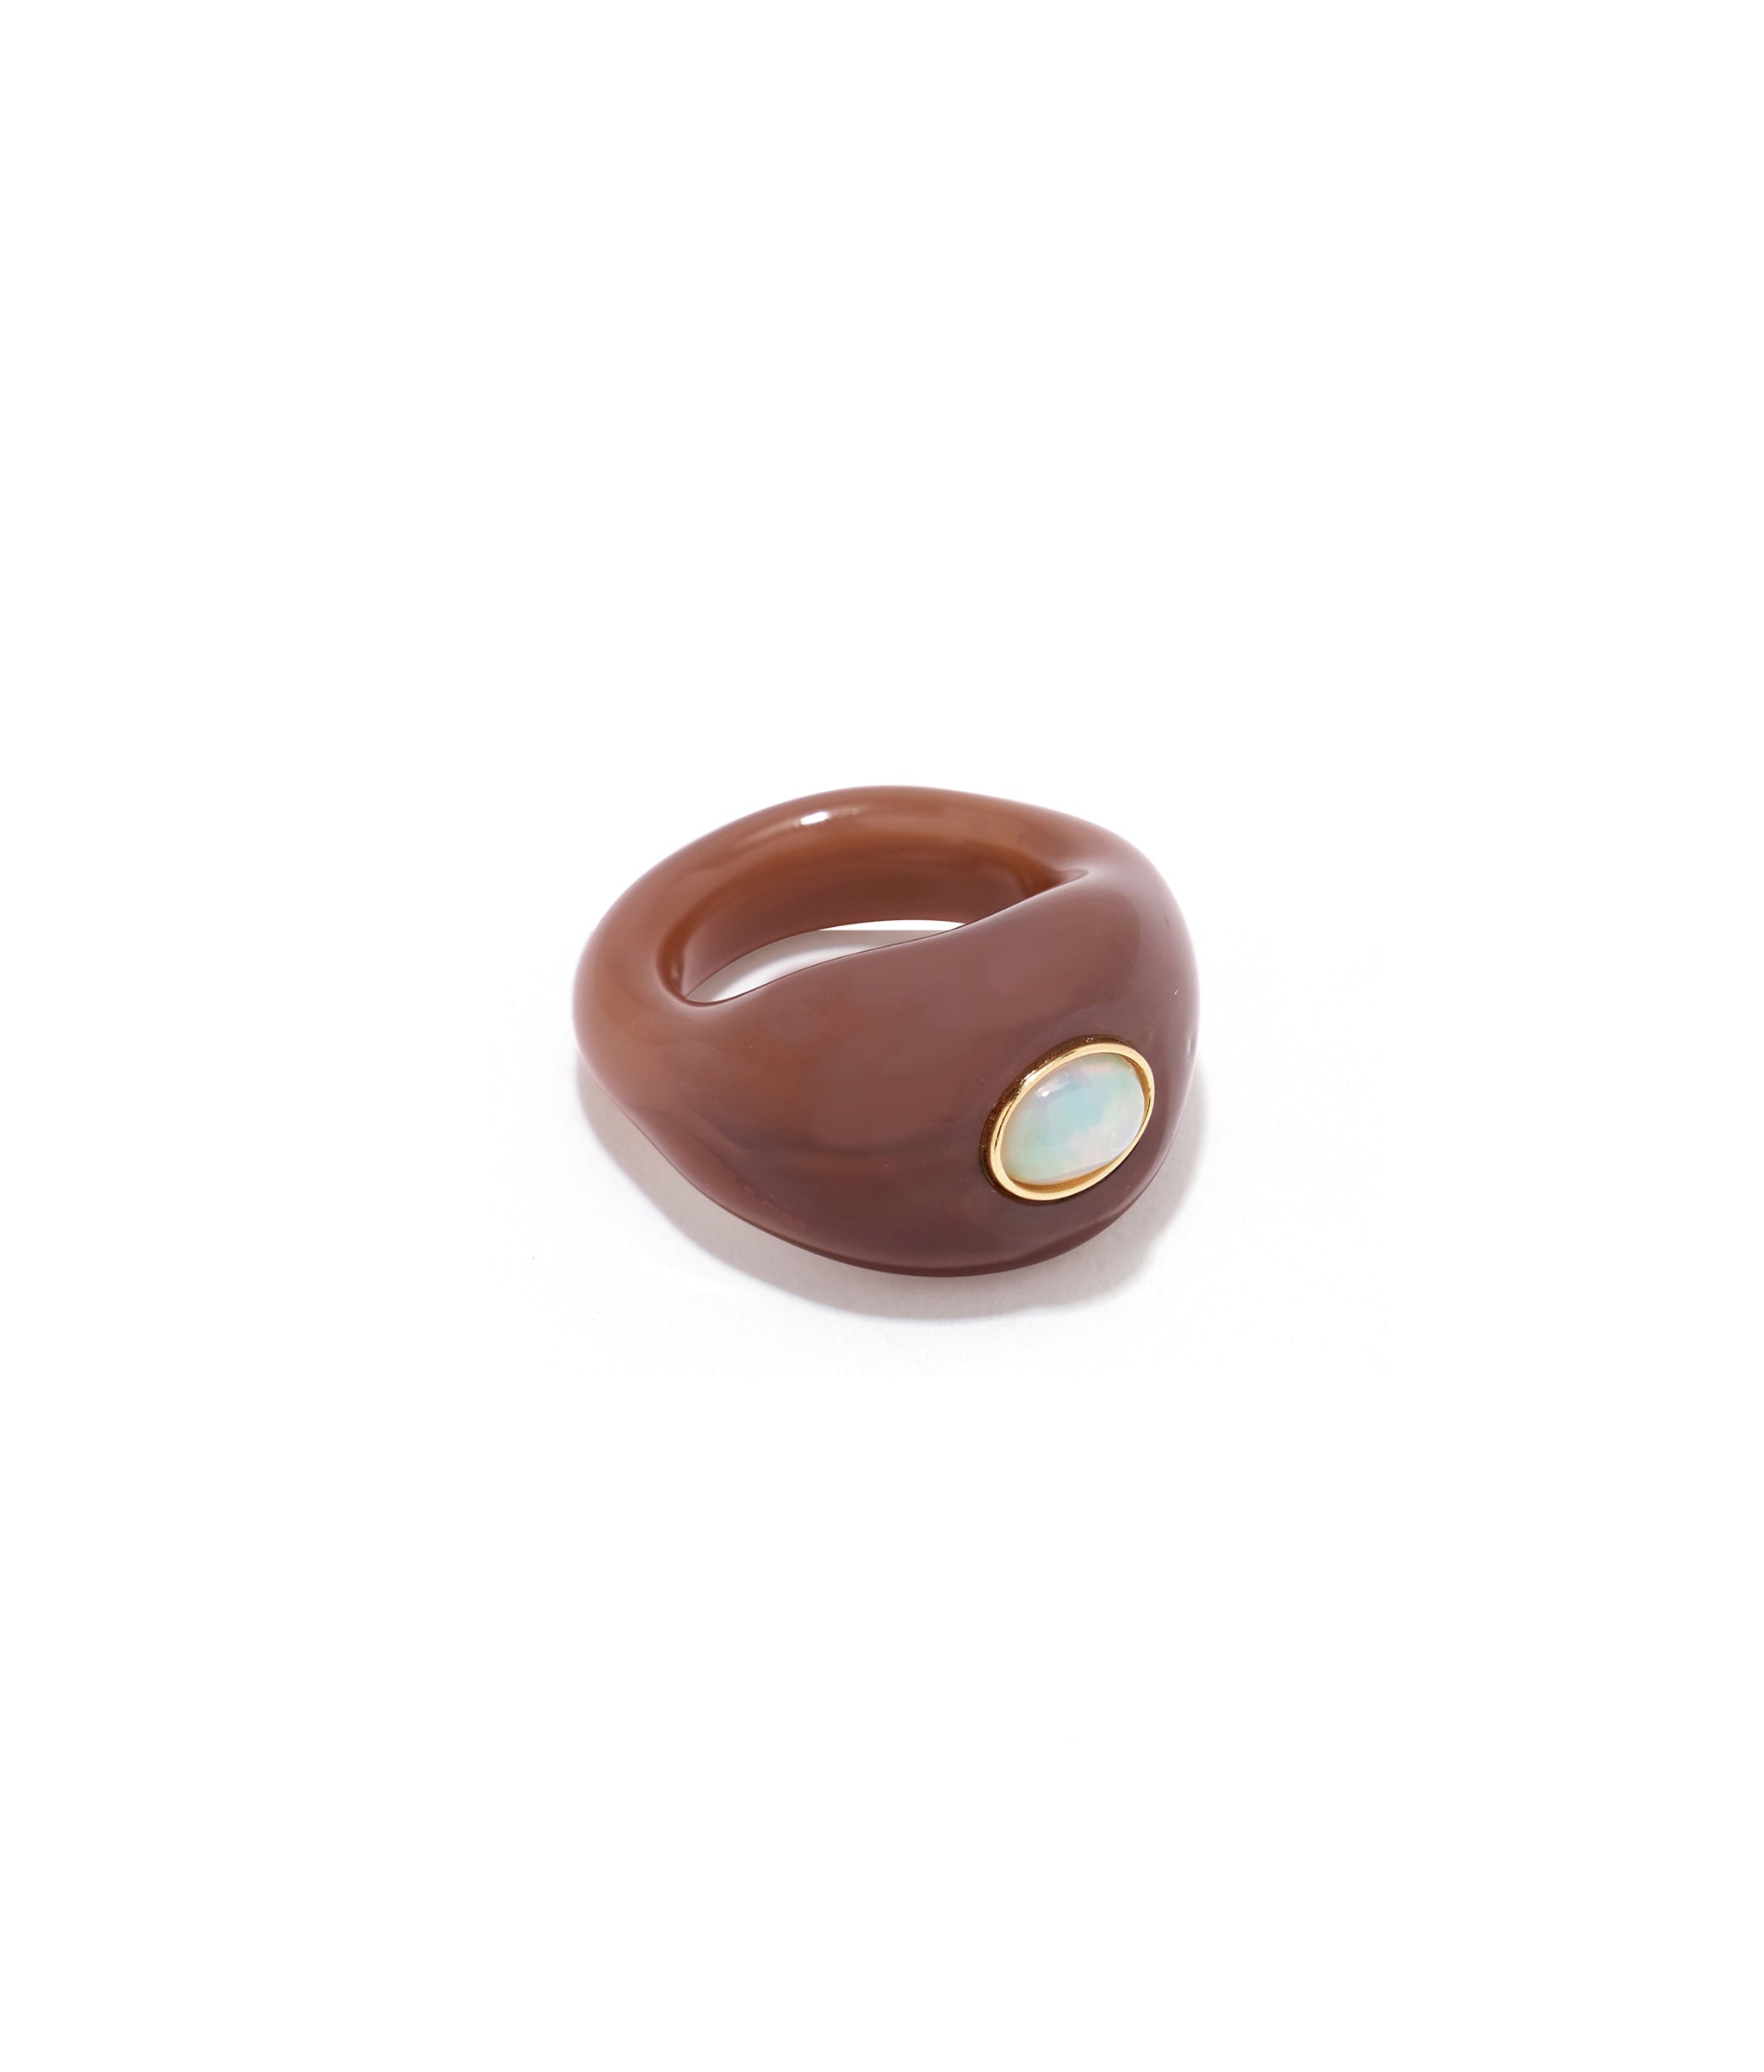 Monument Ring in Sandstone. Domed glass ring in mocha brown, inlaid with opal cabochon.